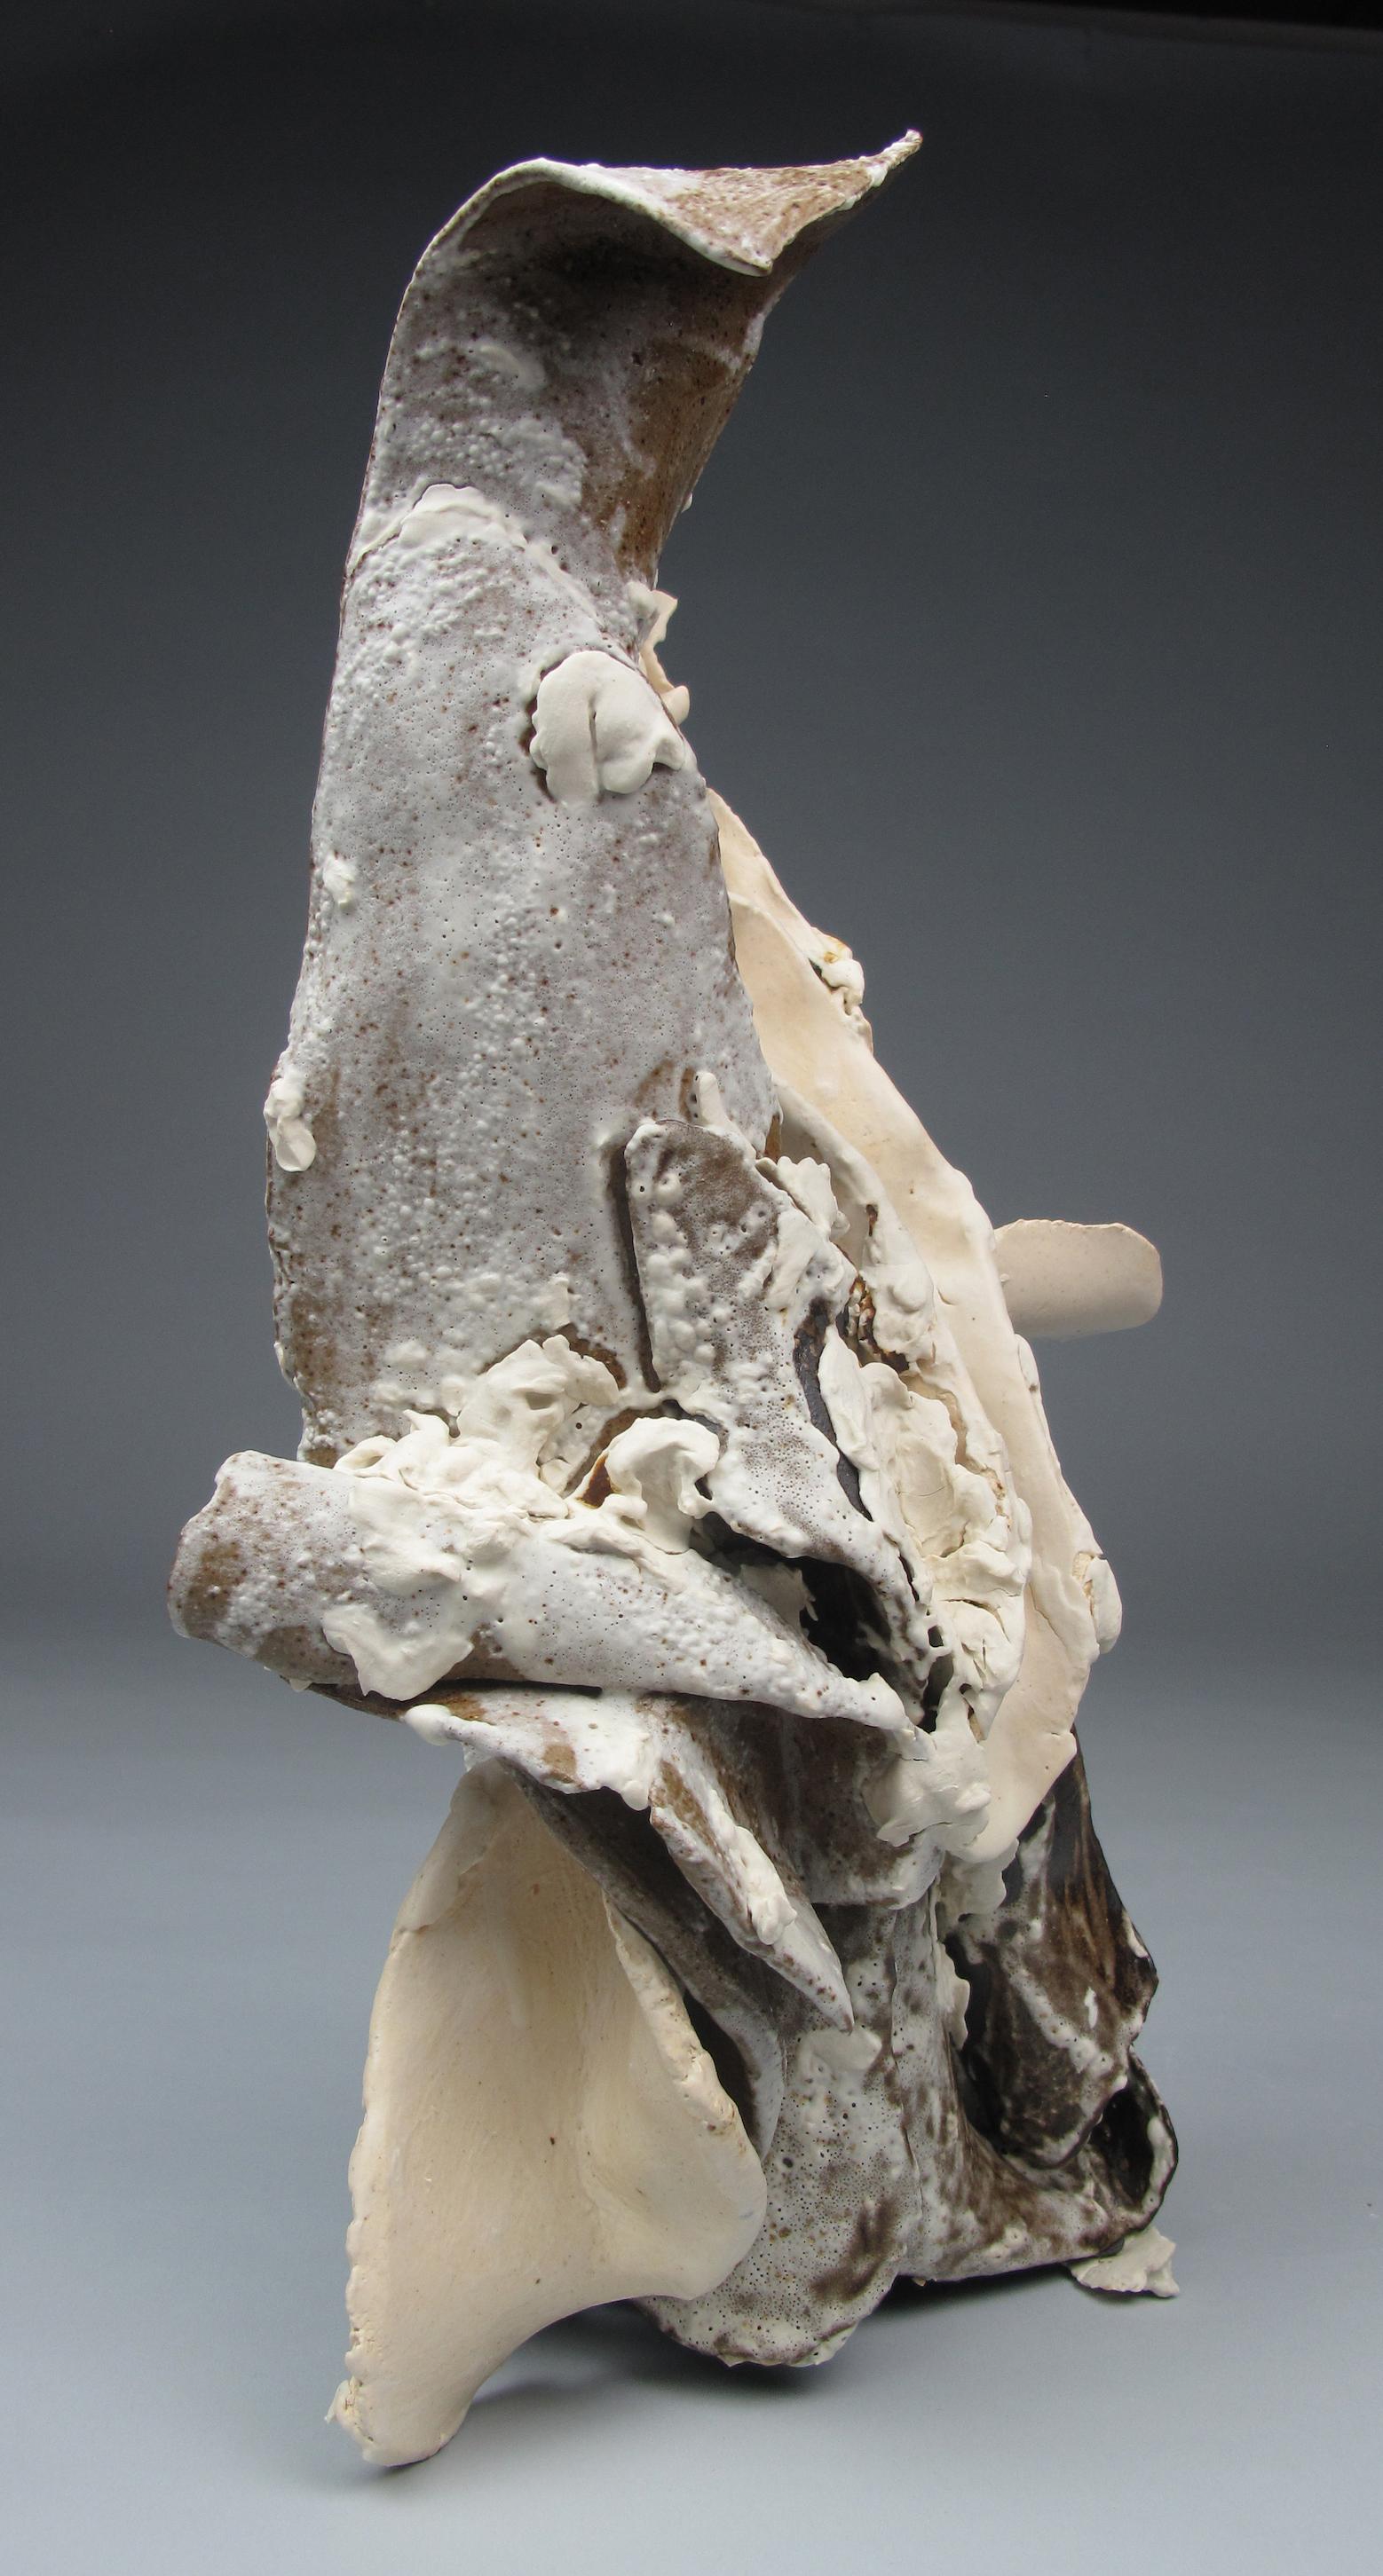 Sara Fine-Wilsons ”Jagged” is a gestural 16 x 9.5 x 6 inch ceramic sculpture in shades of brown, white and cream. In this powerful and evocative sculpture individual slab and pinched elements formed from multiple clay body types are assembled,